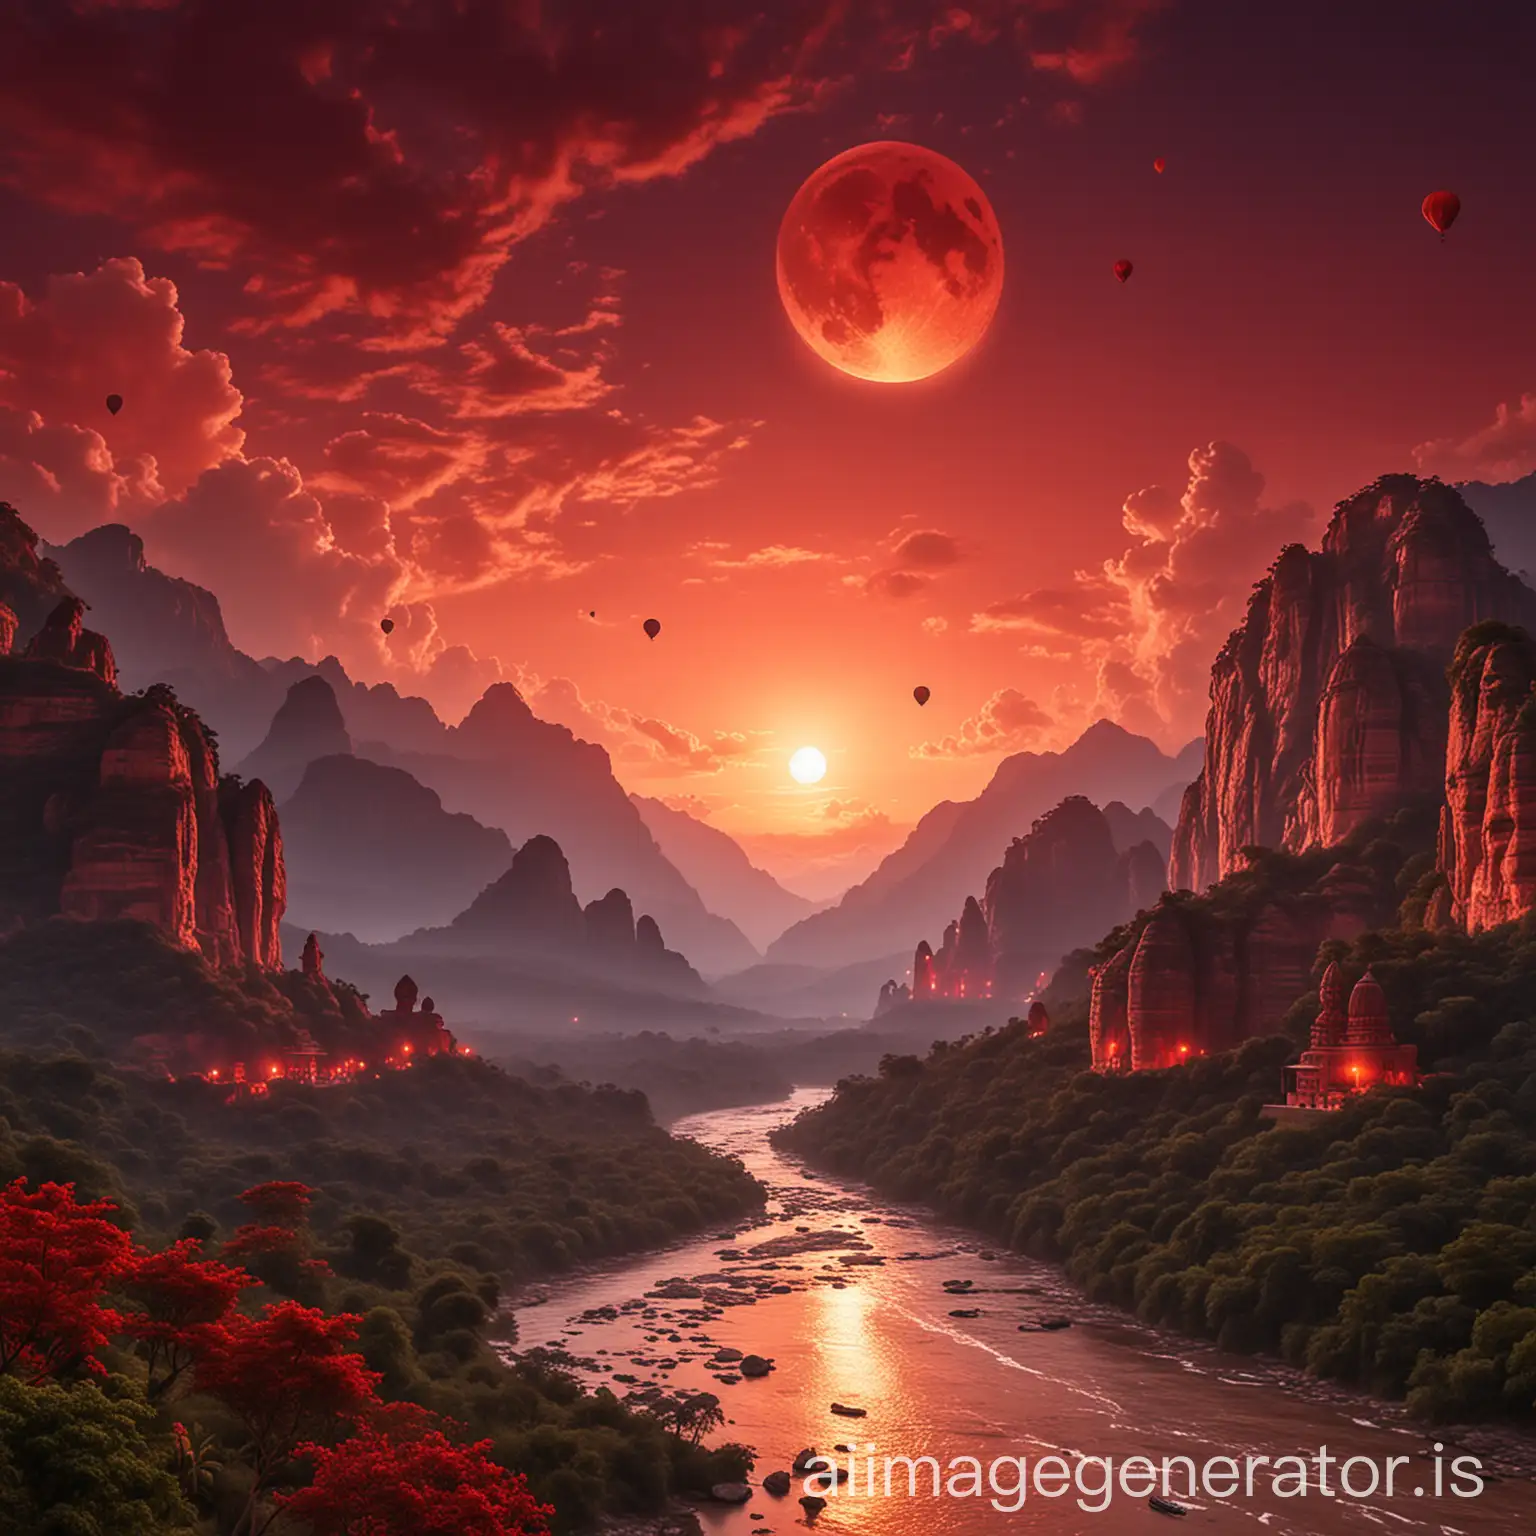 Red-Sky-with-Moon-and-Mountains-Hot-Air-Balloons-and-Bajrangbali-Statue-in-Jungle